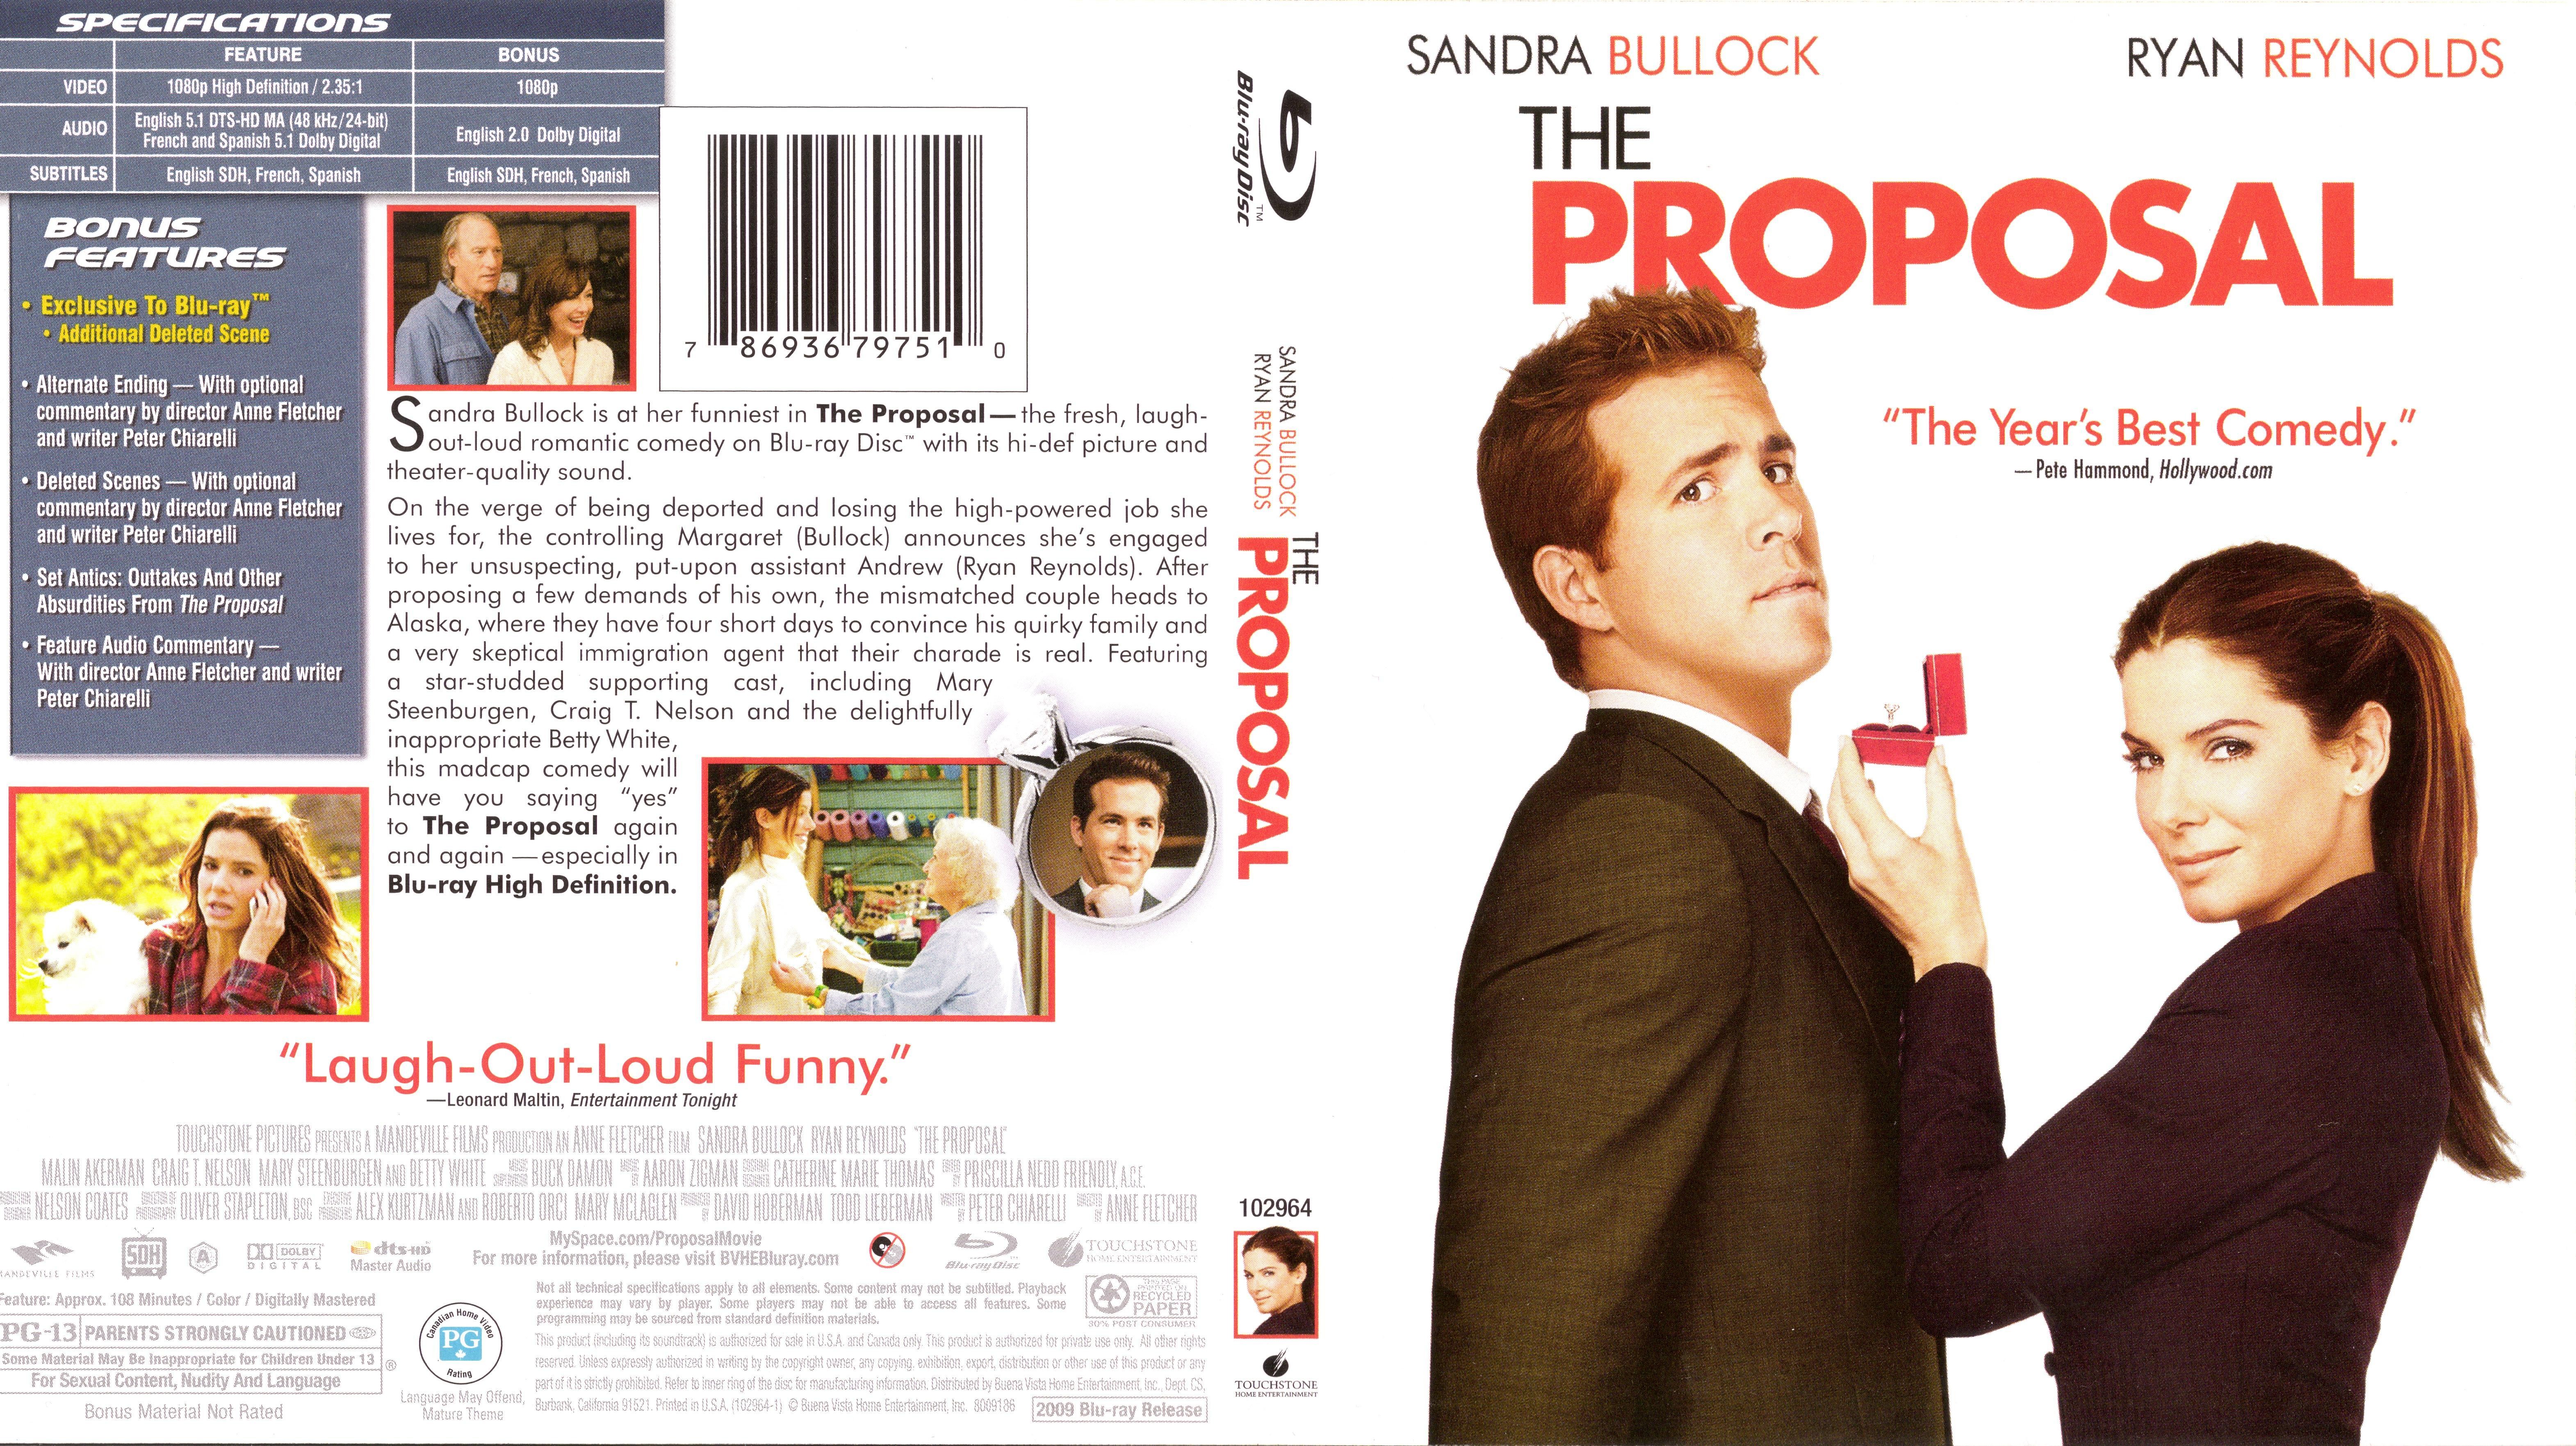 Jaquette DVD La proposition - The proposal (Canadienne) (BLU-RAY)